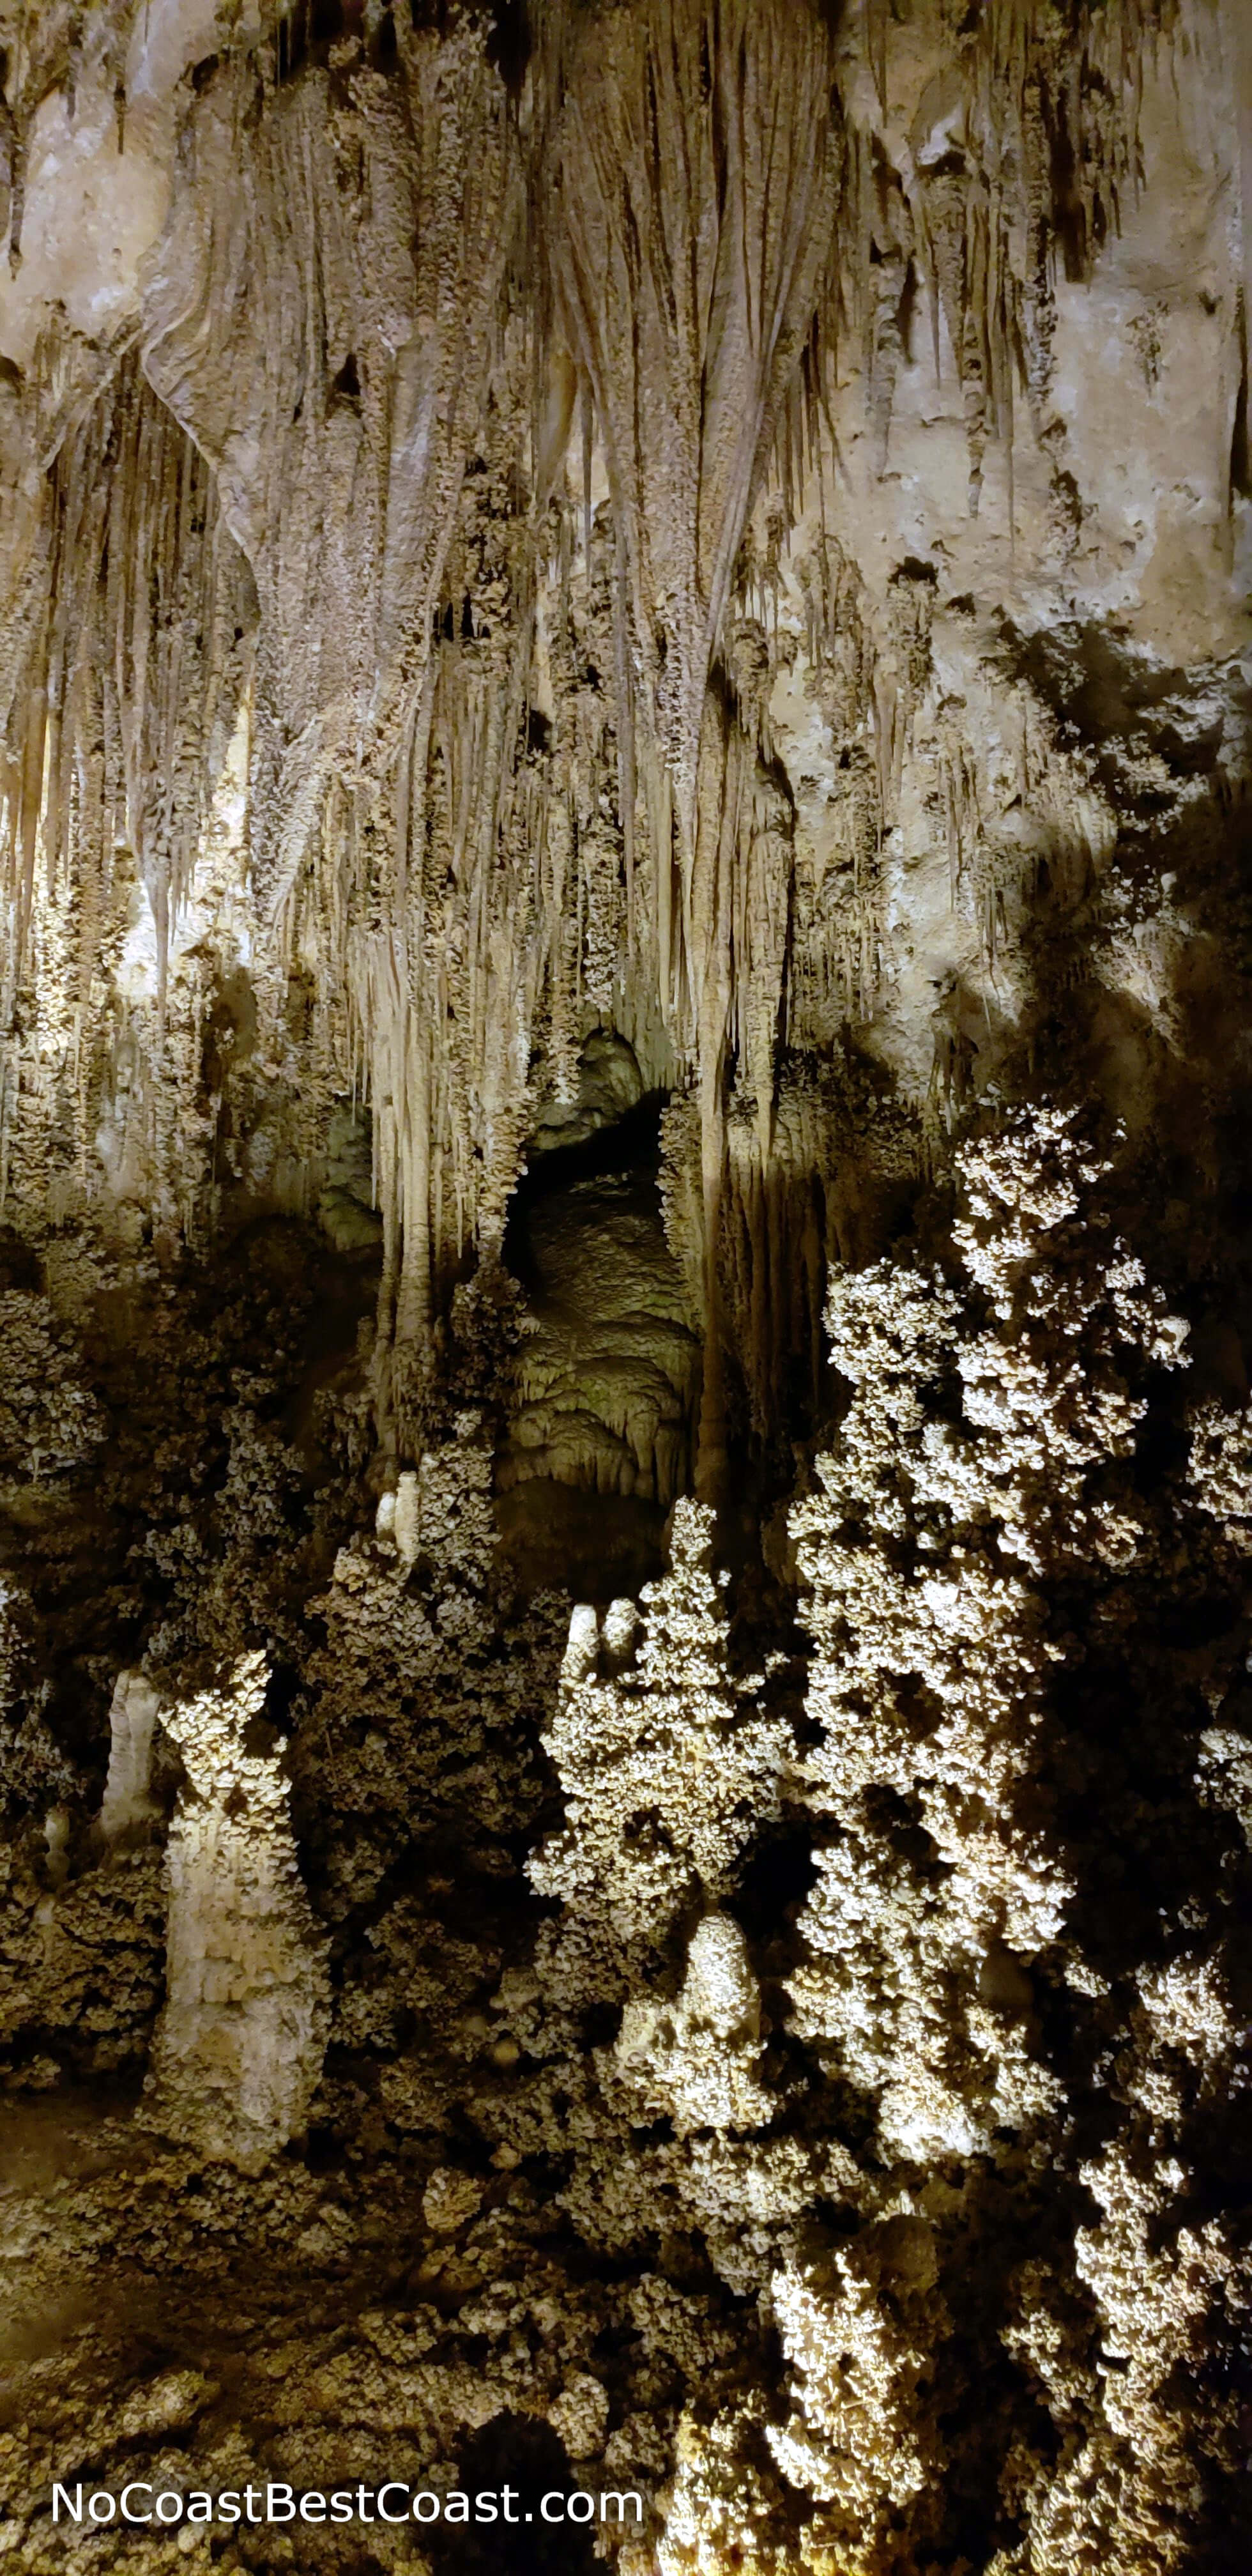 Draperies and cave popcorn are two unique formations you'll see